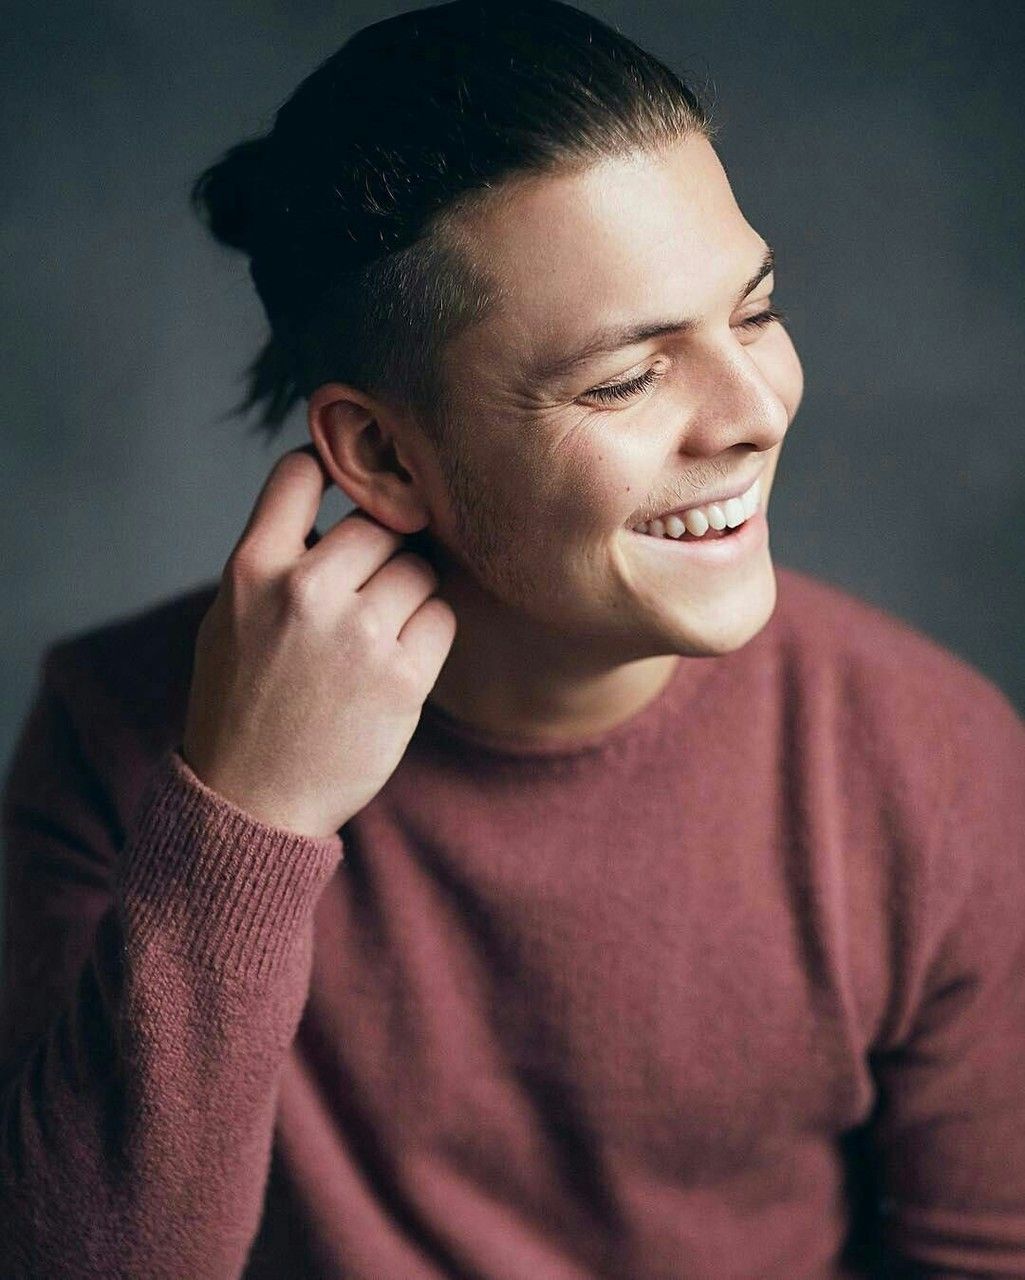 image about alex høgh andersen. See more about alex hogh andersen, vikings and actor